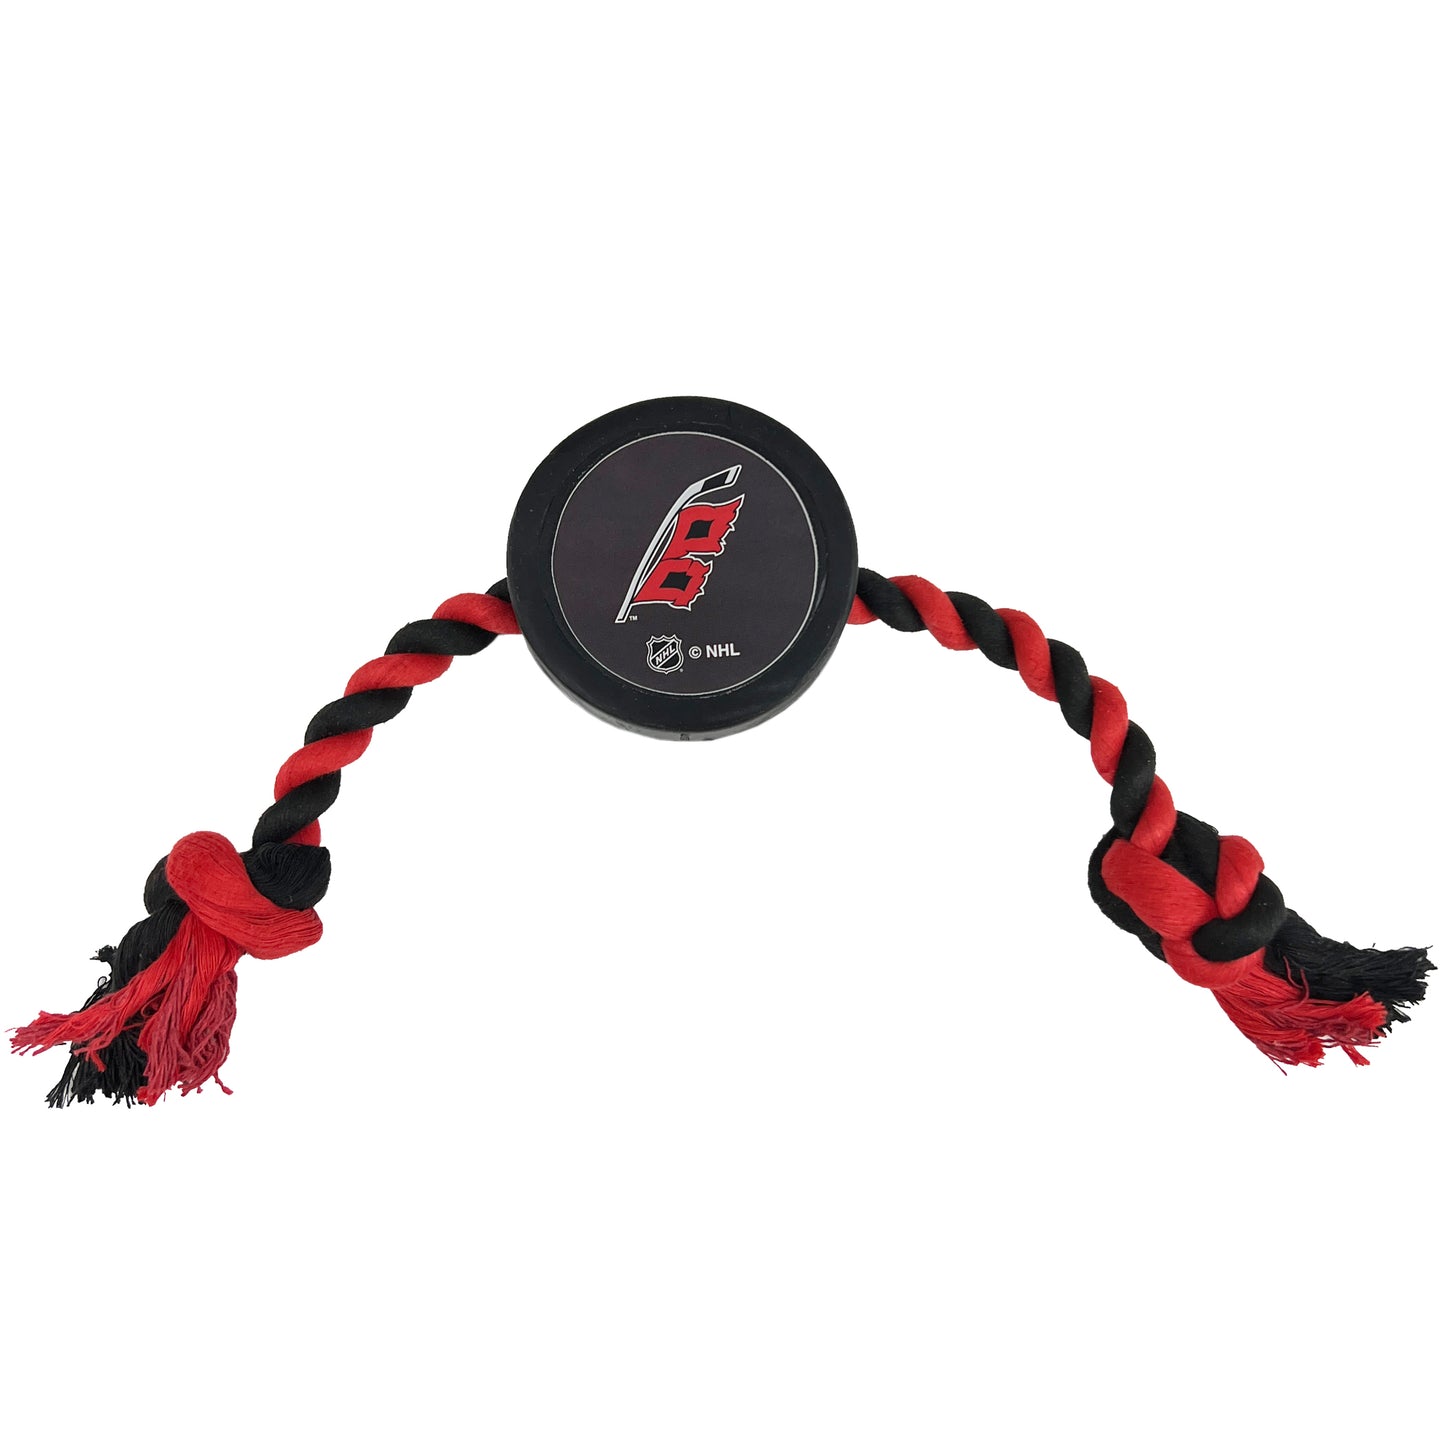 Pets First Hurricanes Hockey Puck Dog Toy - Black